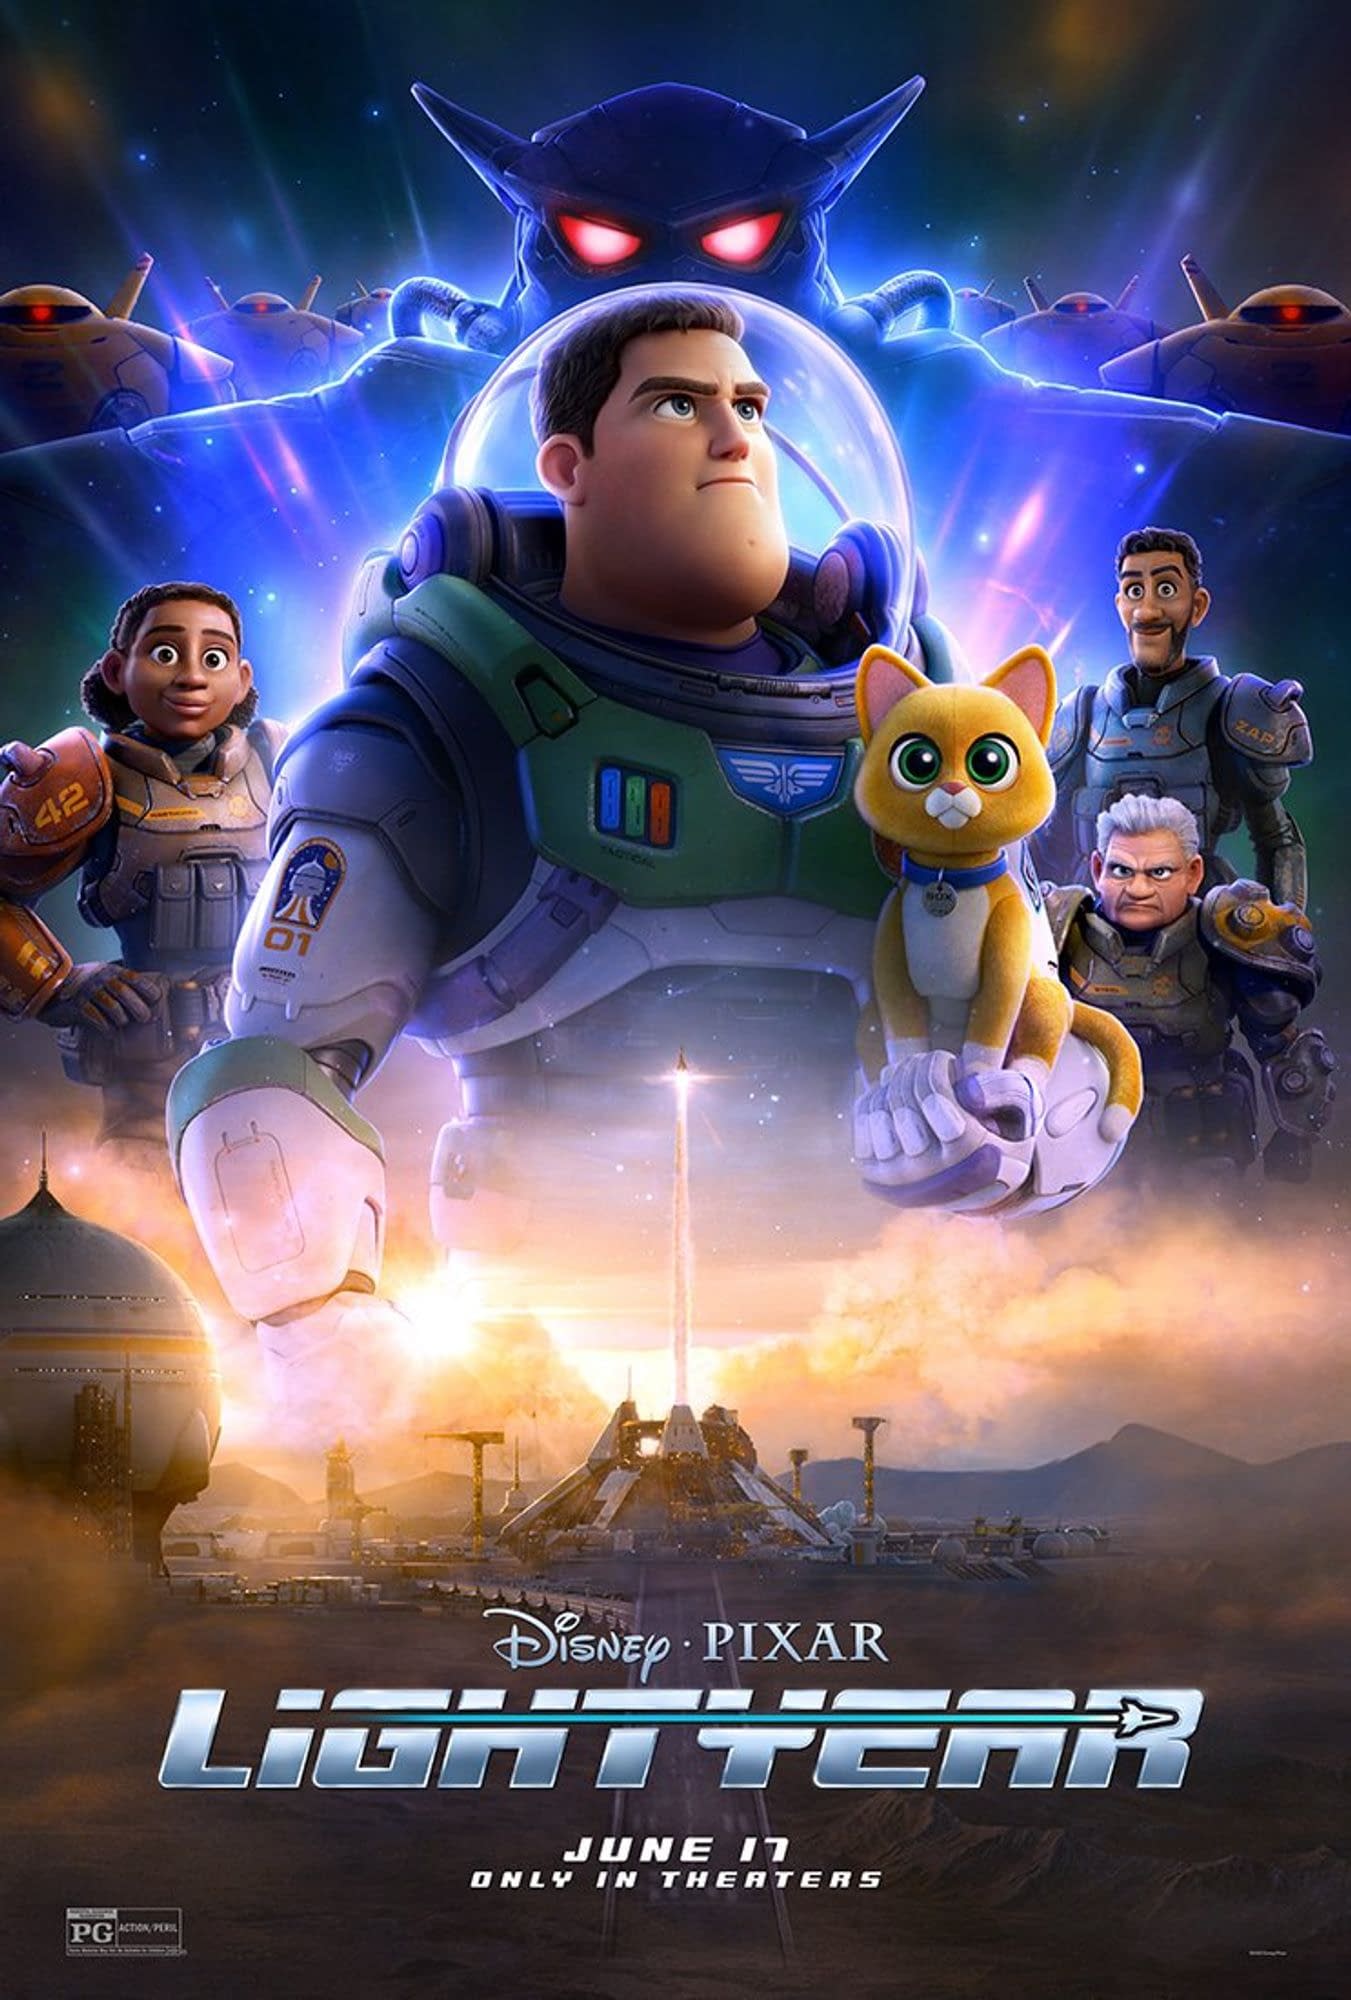 Lightyear A New Poster A Special Look and a New Image